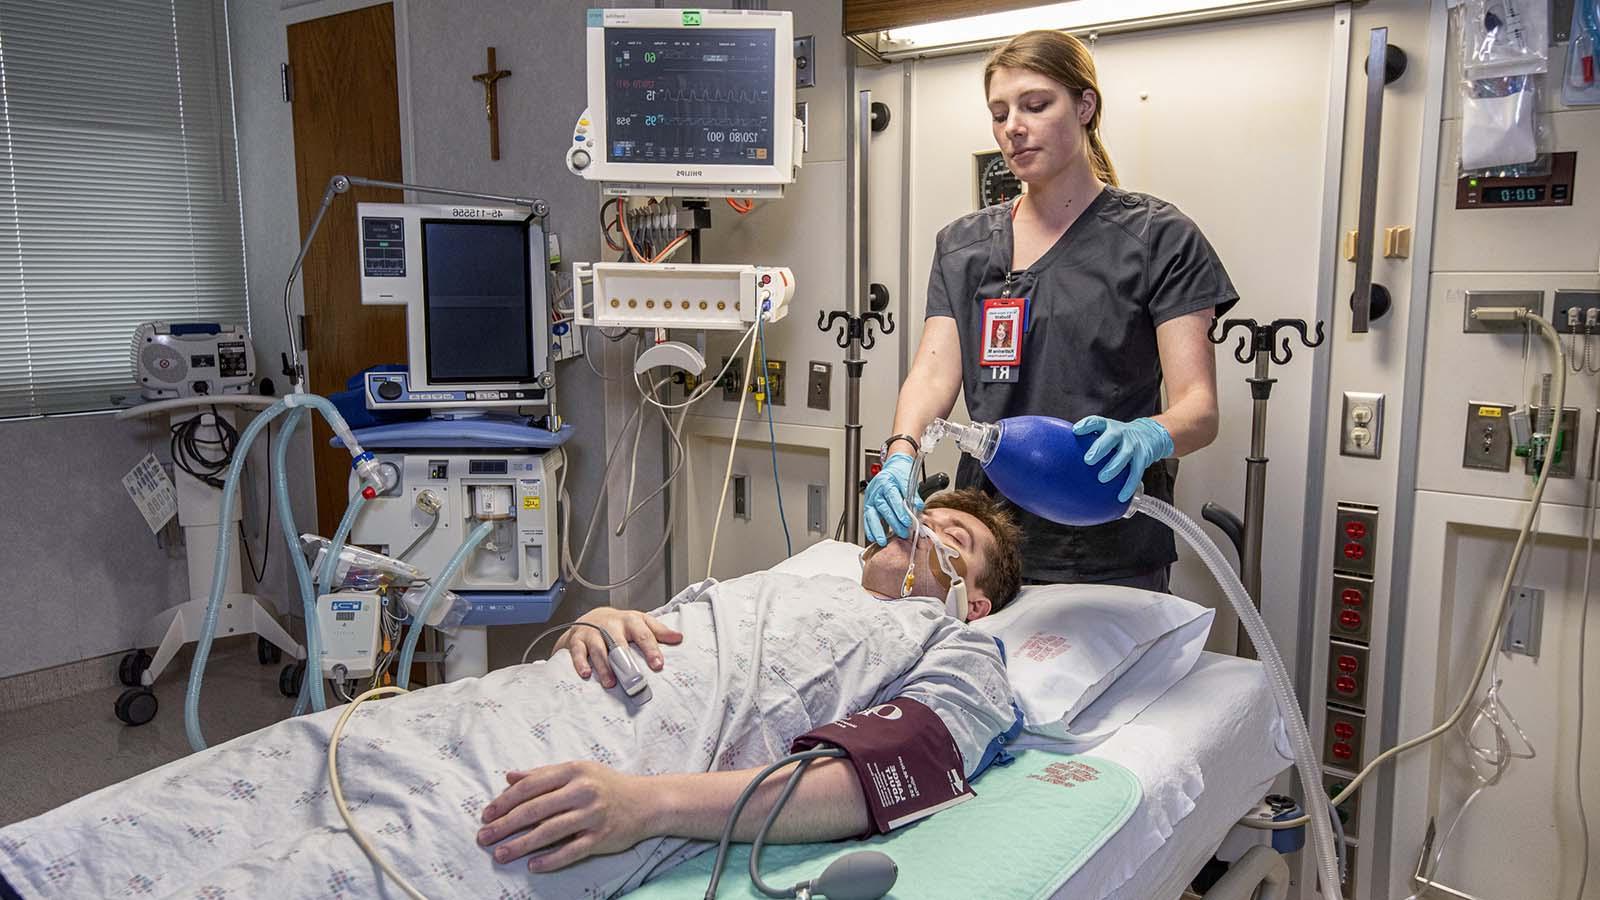 Respiratory therapist intubating patient in hospital